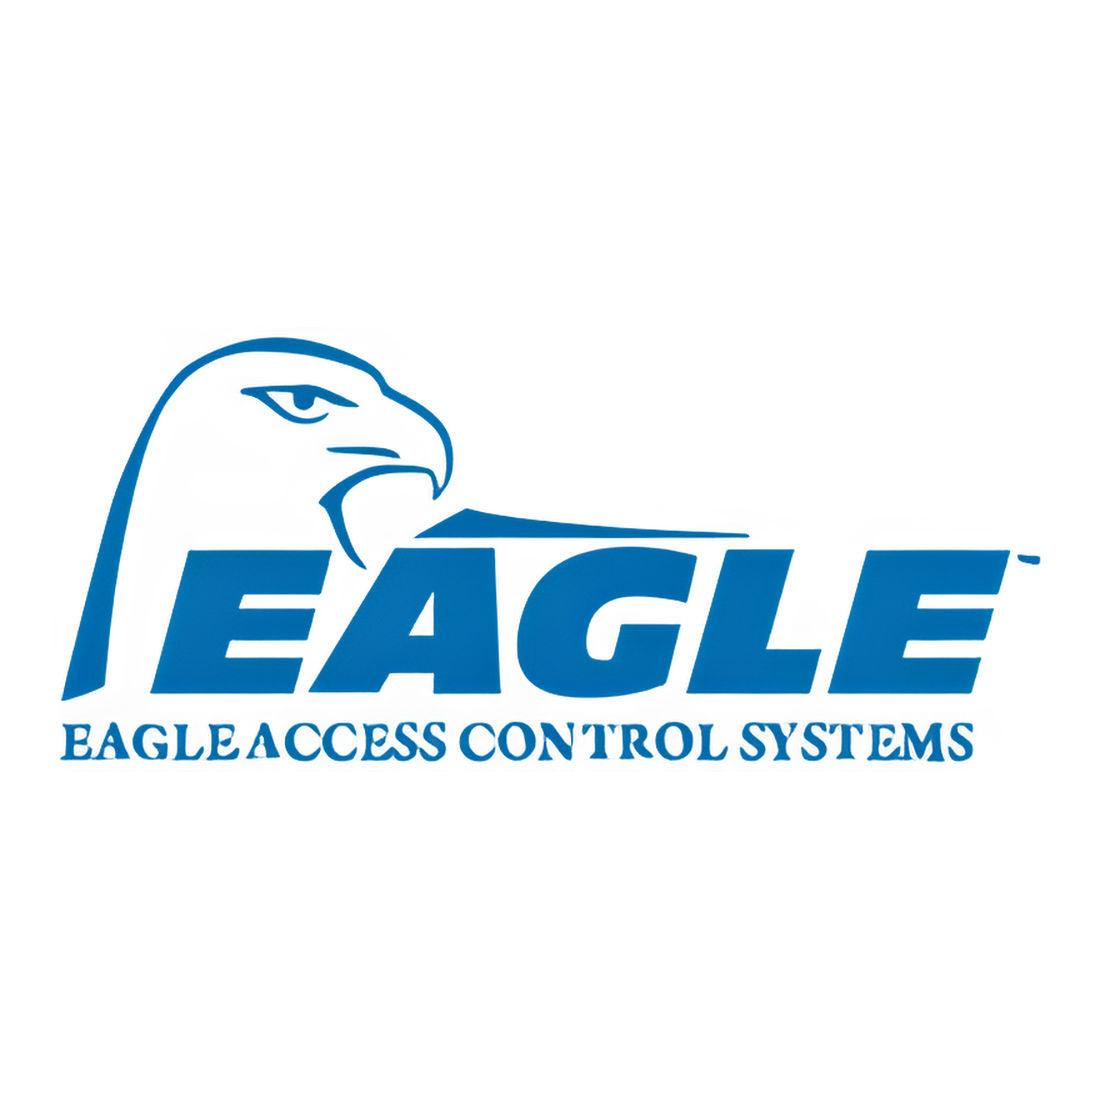 Eagle Gate Systems